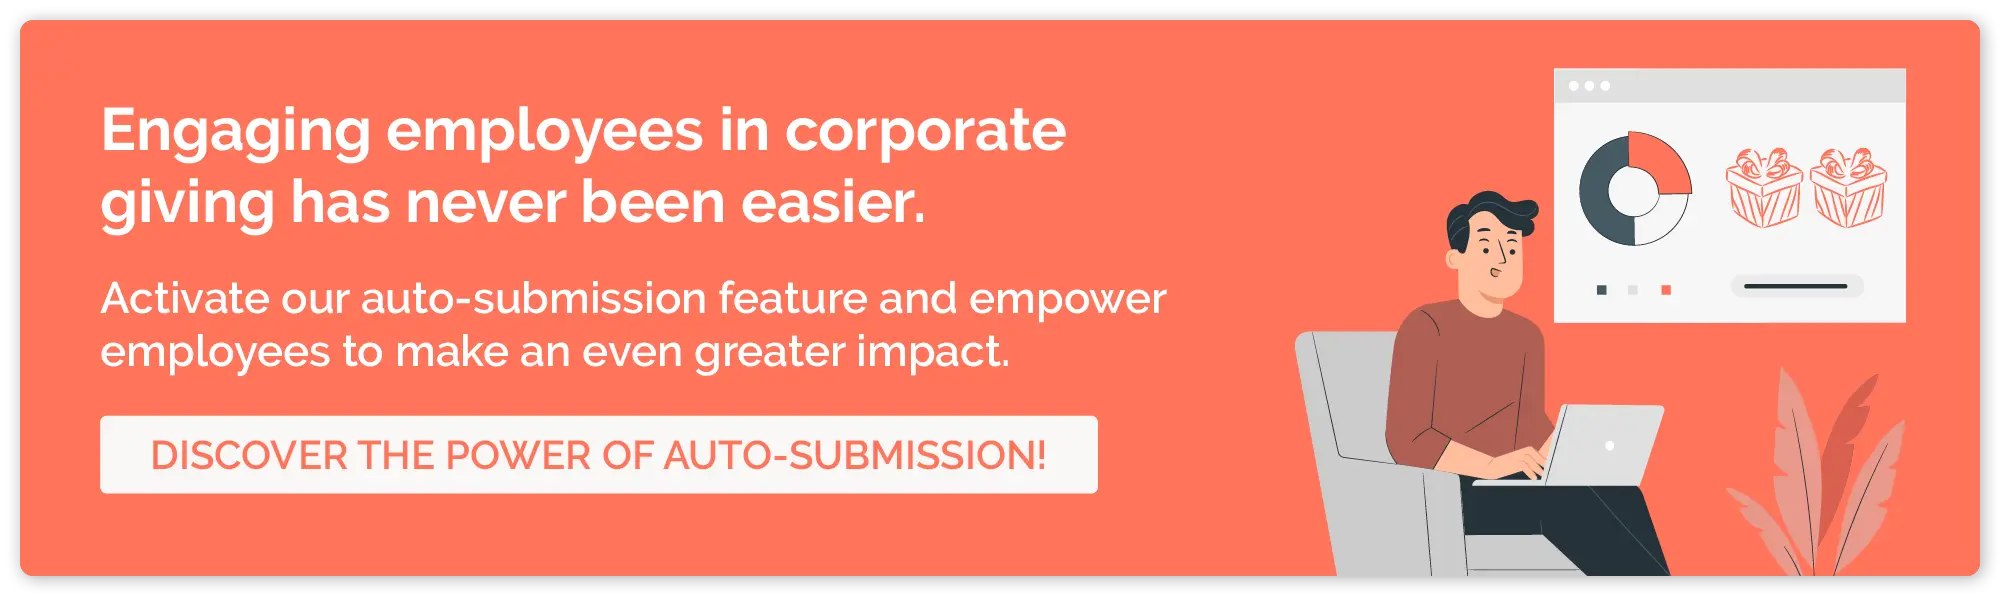 If you're ready to level up your employee engagement strategies with corporate giving, get started with auto-submission.